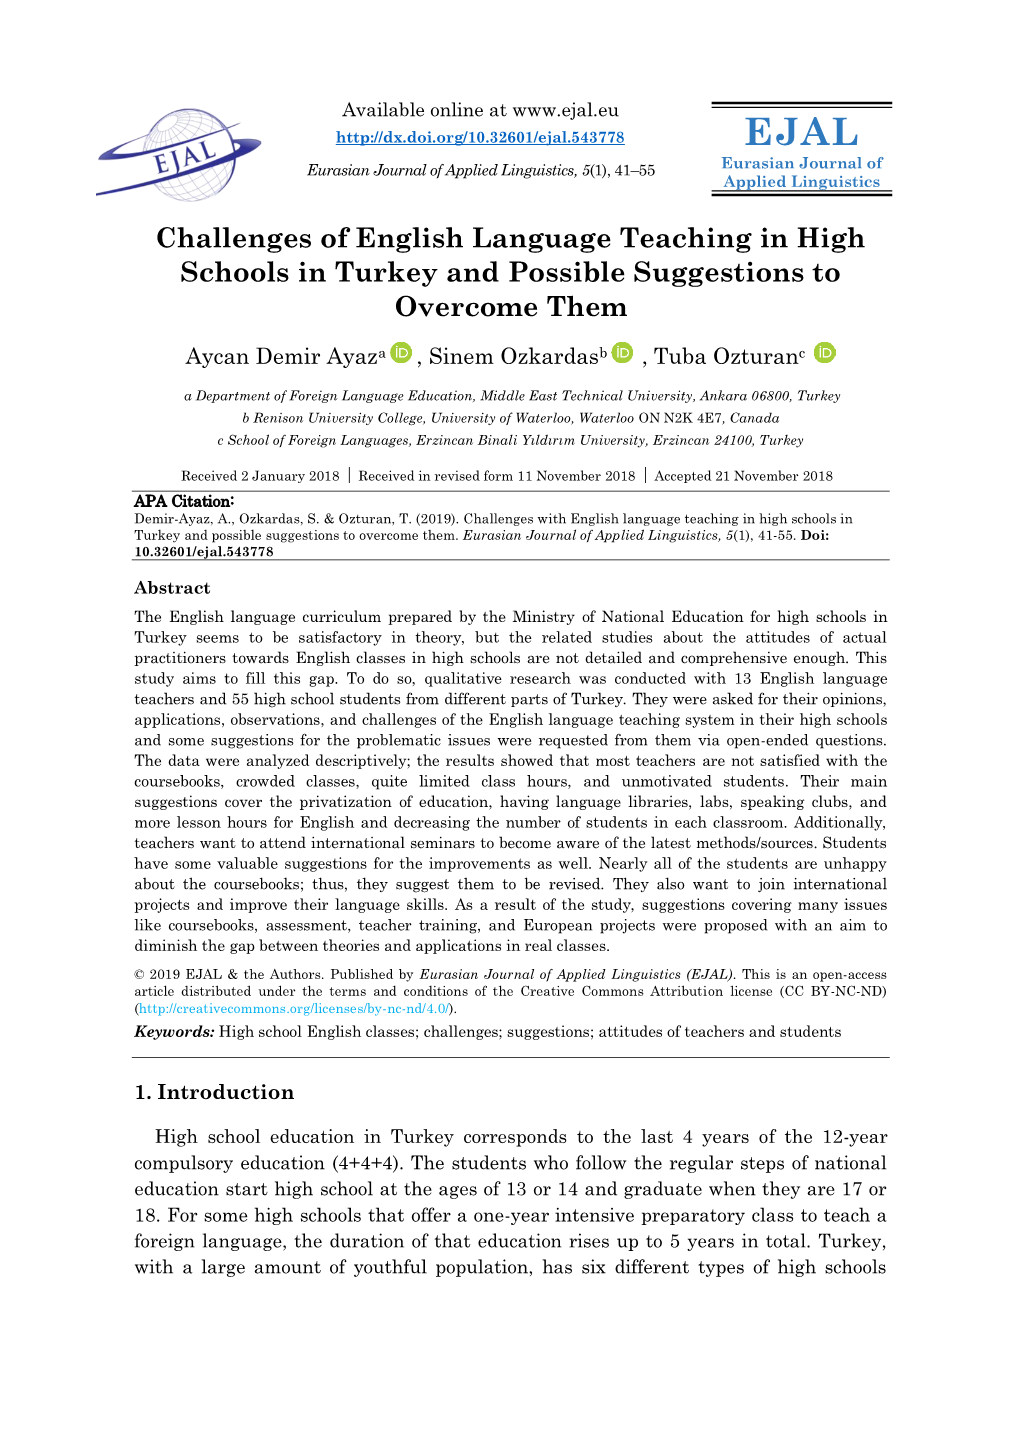 Challenges of English Language Teaching in High Schools in Turkey and Possible Suggestions to Overcome Them